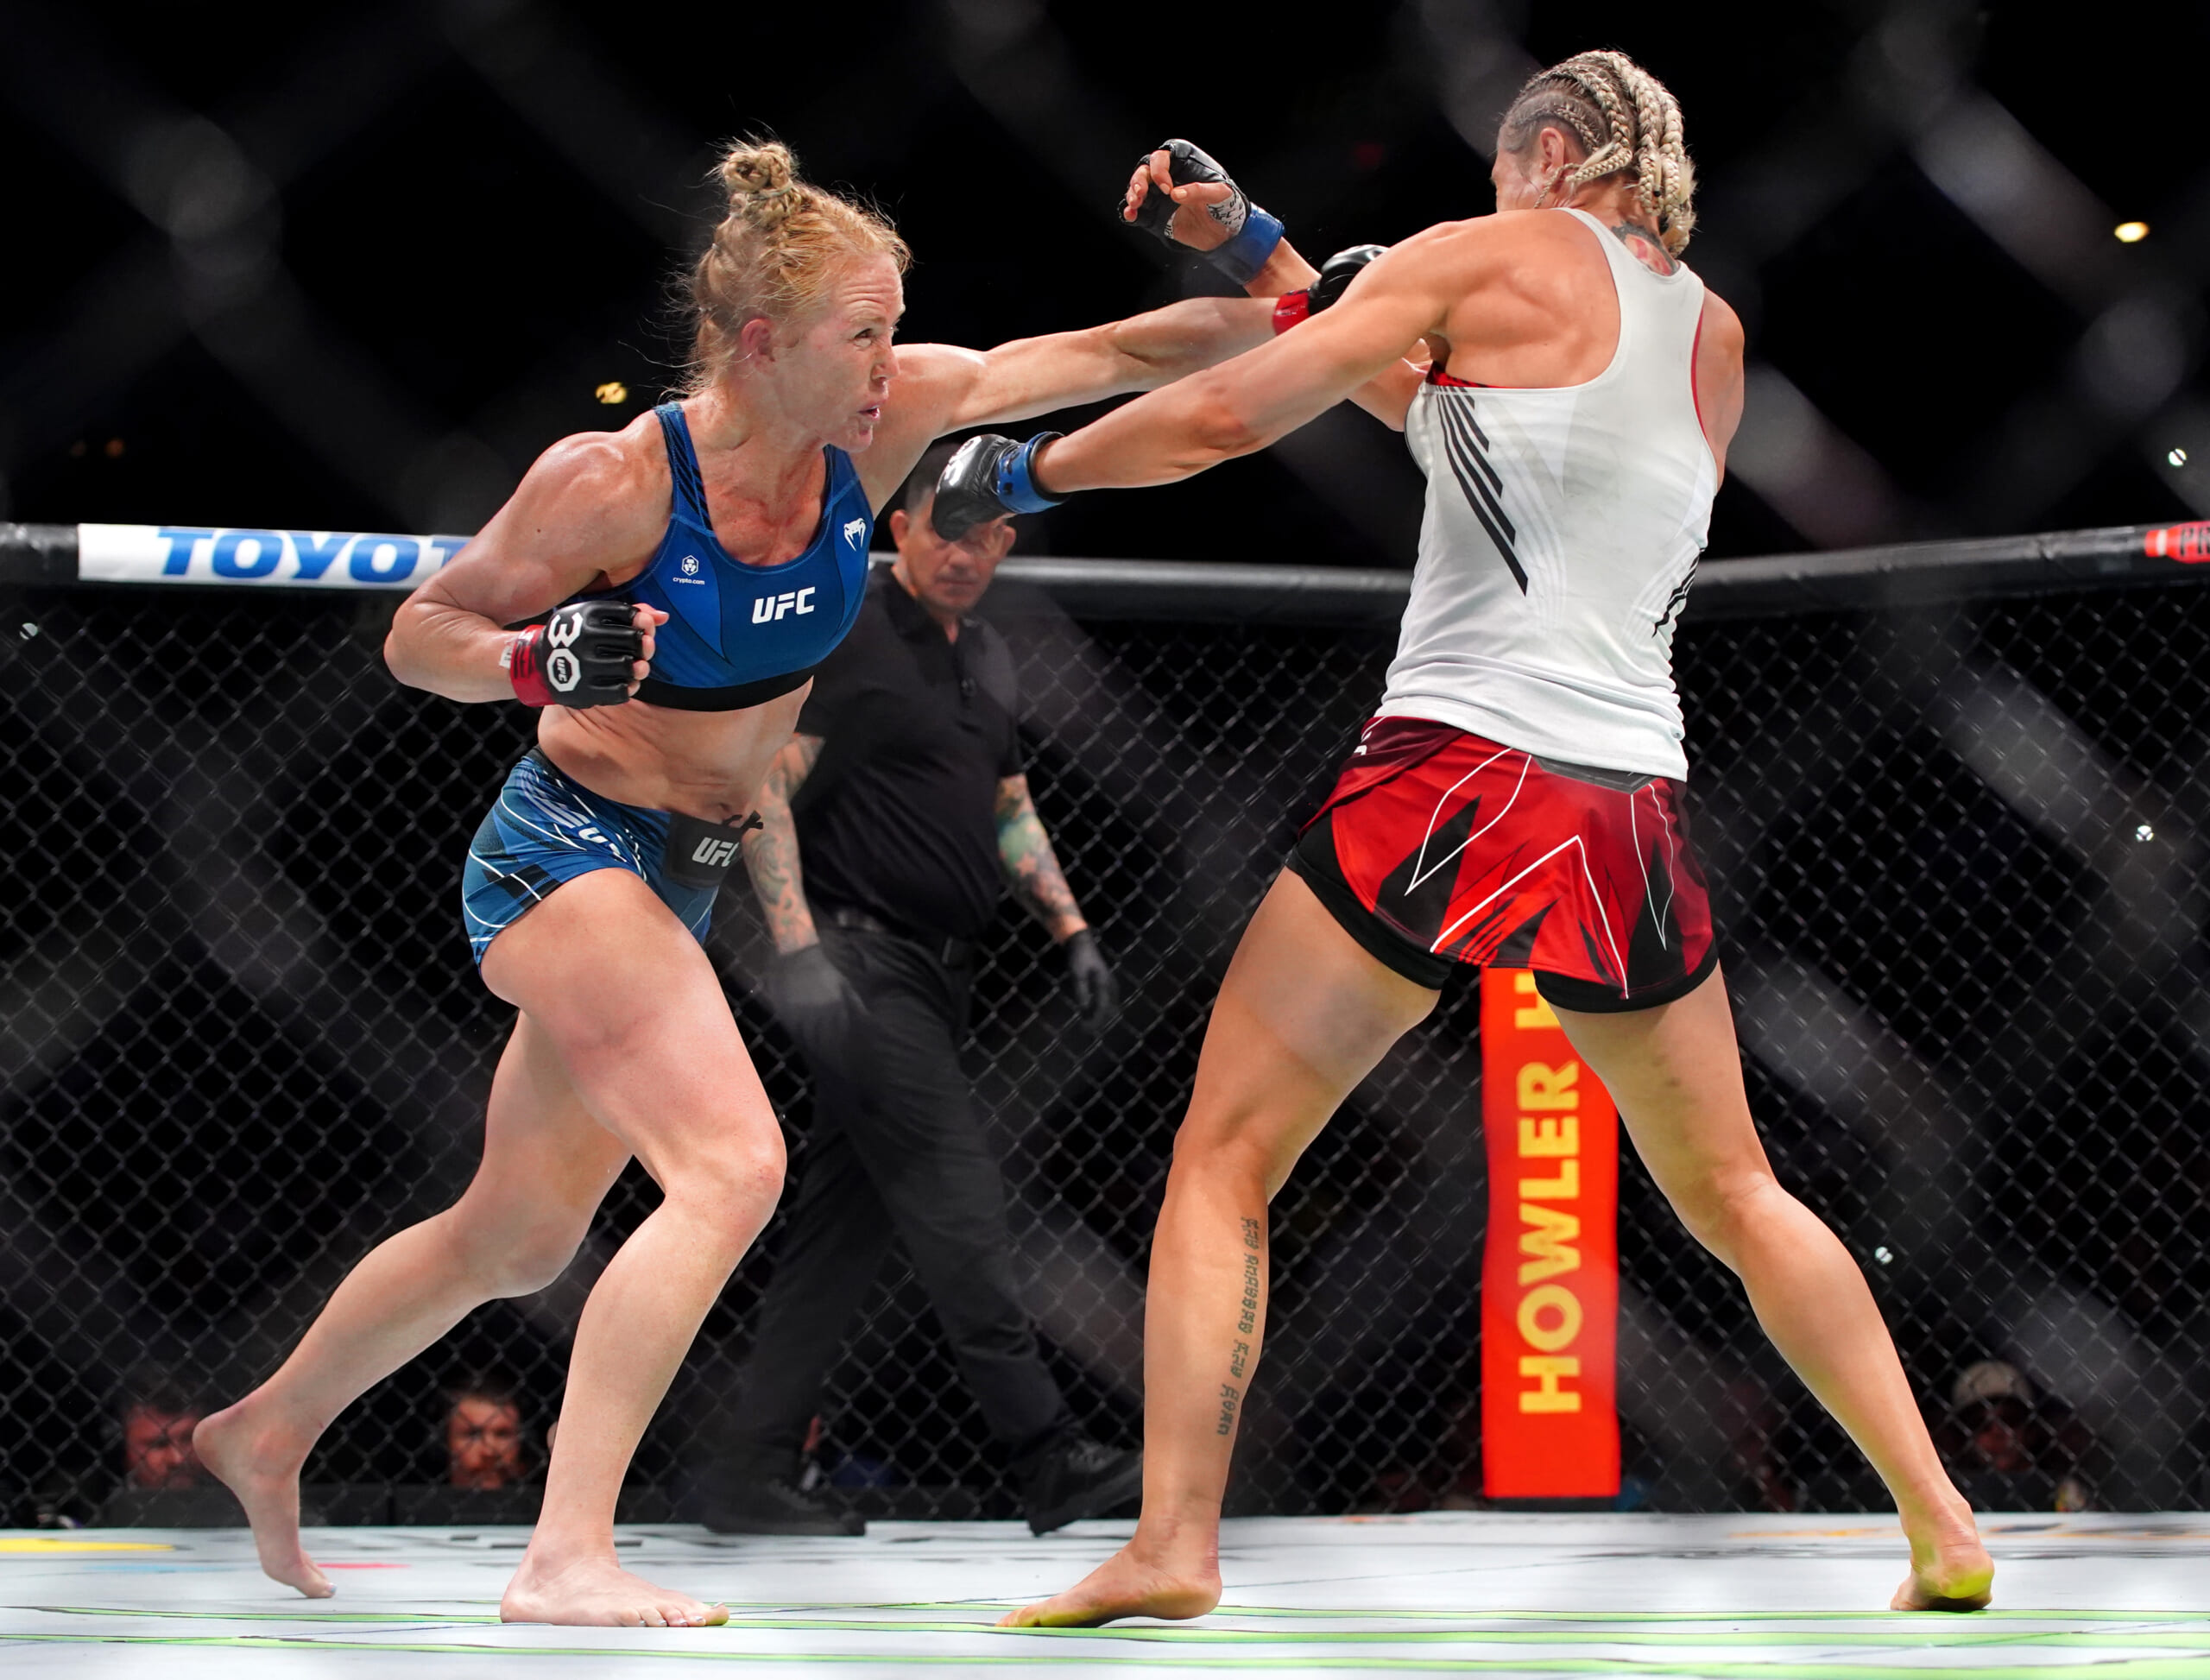 After dominant win at UFC San Antonio, what’s next for Holly Holm?